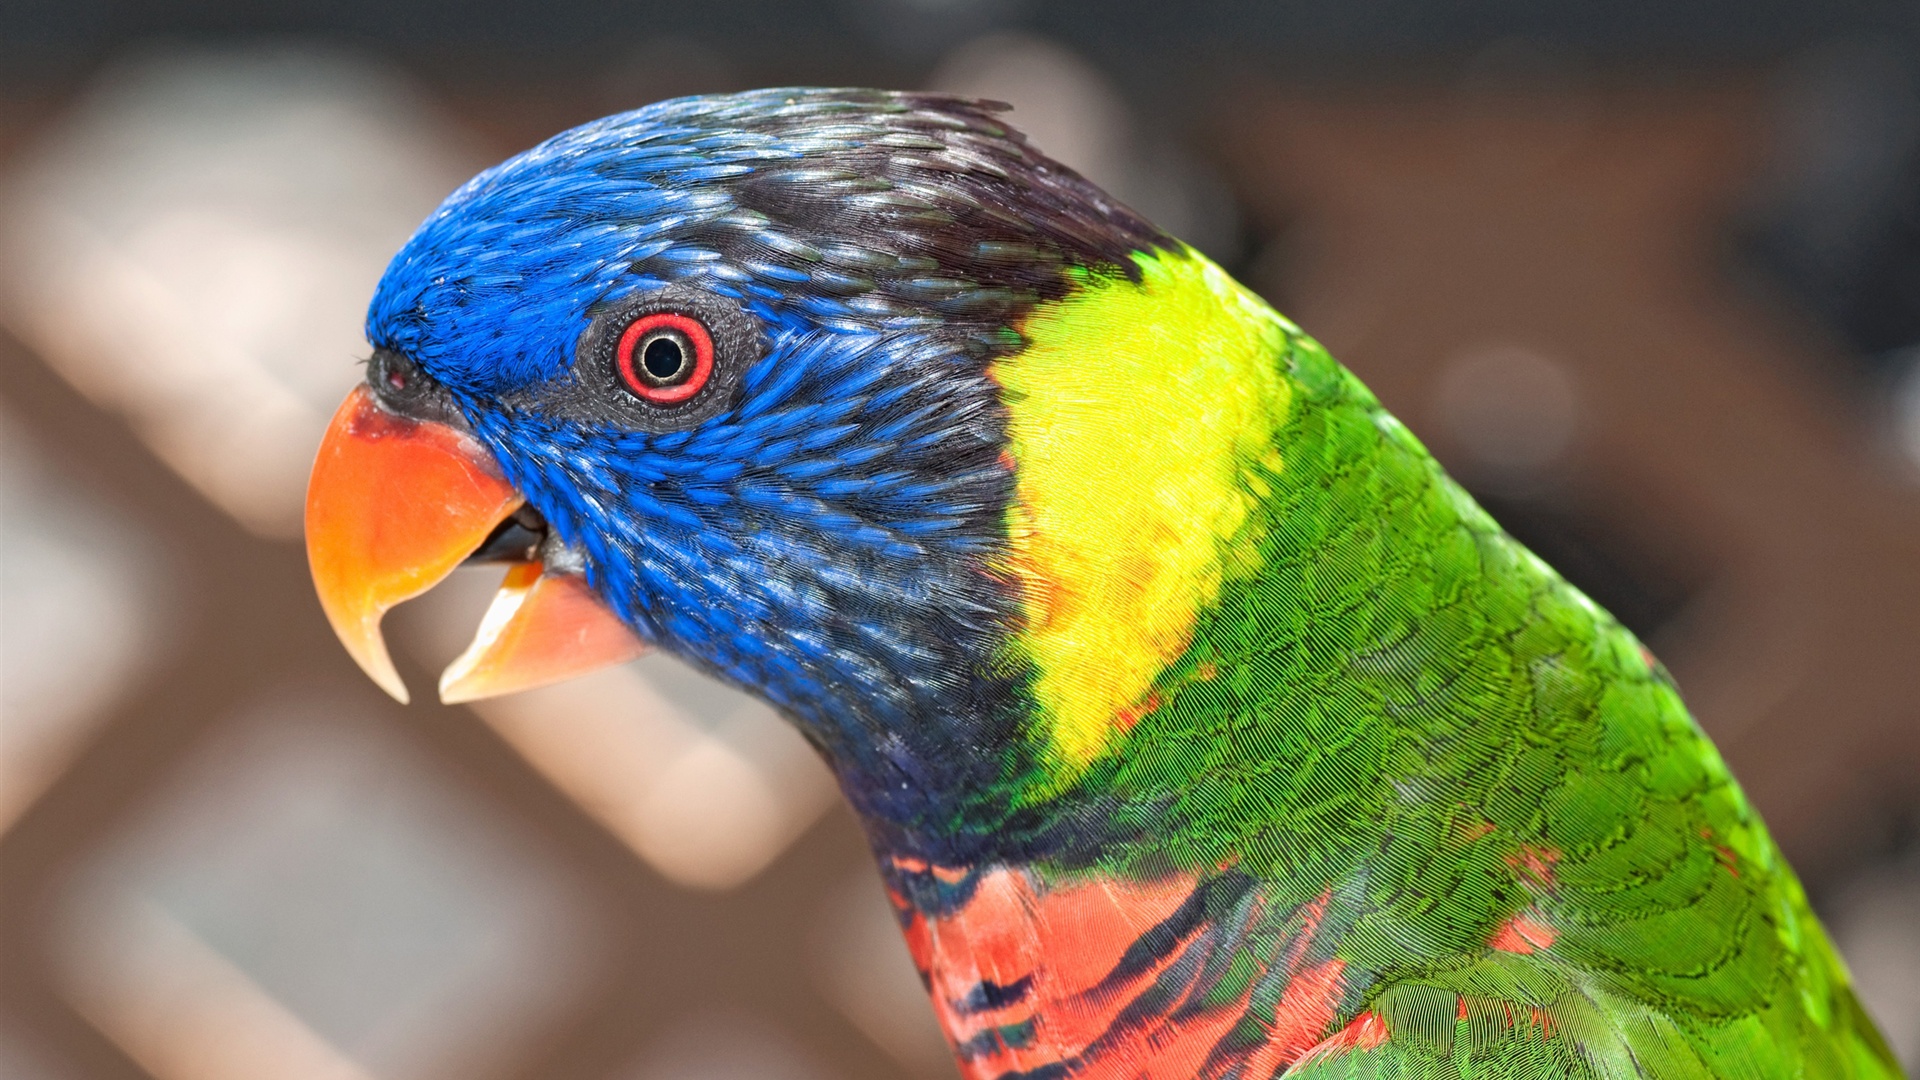 Download Wallpaper 1920x1080 Parrot close-up, blurred background ...